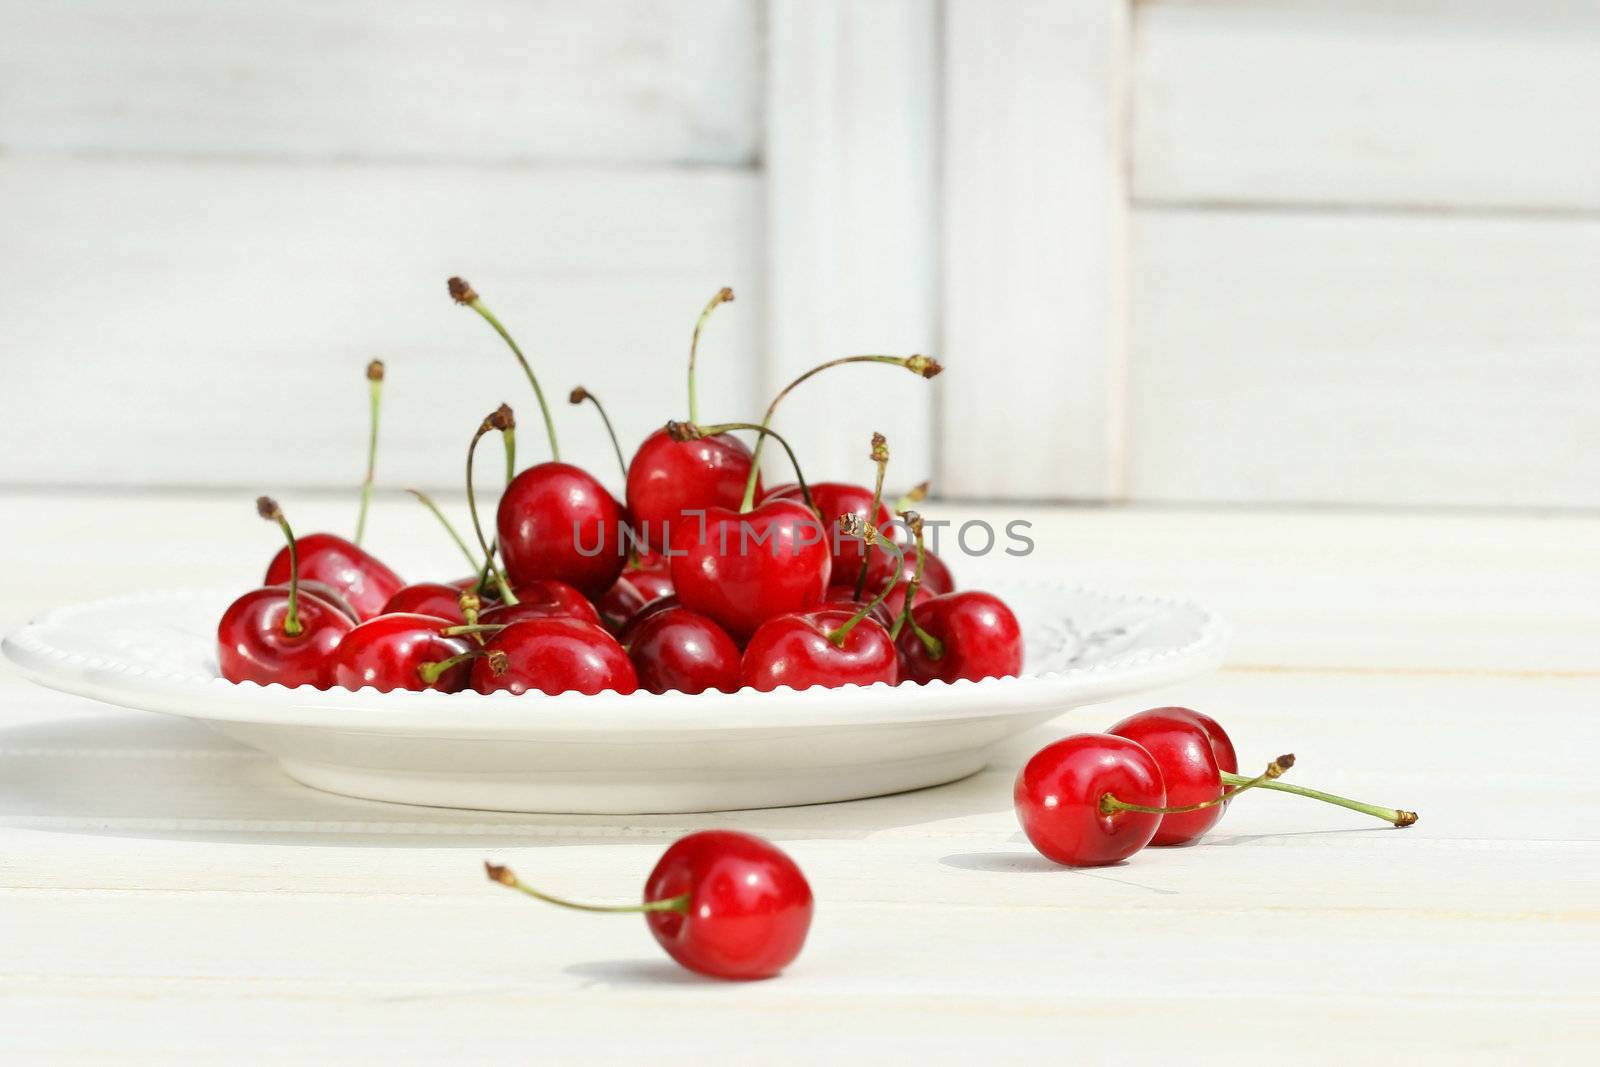 Cherries on a white plate by Sandralise